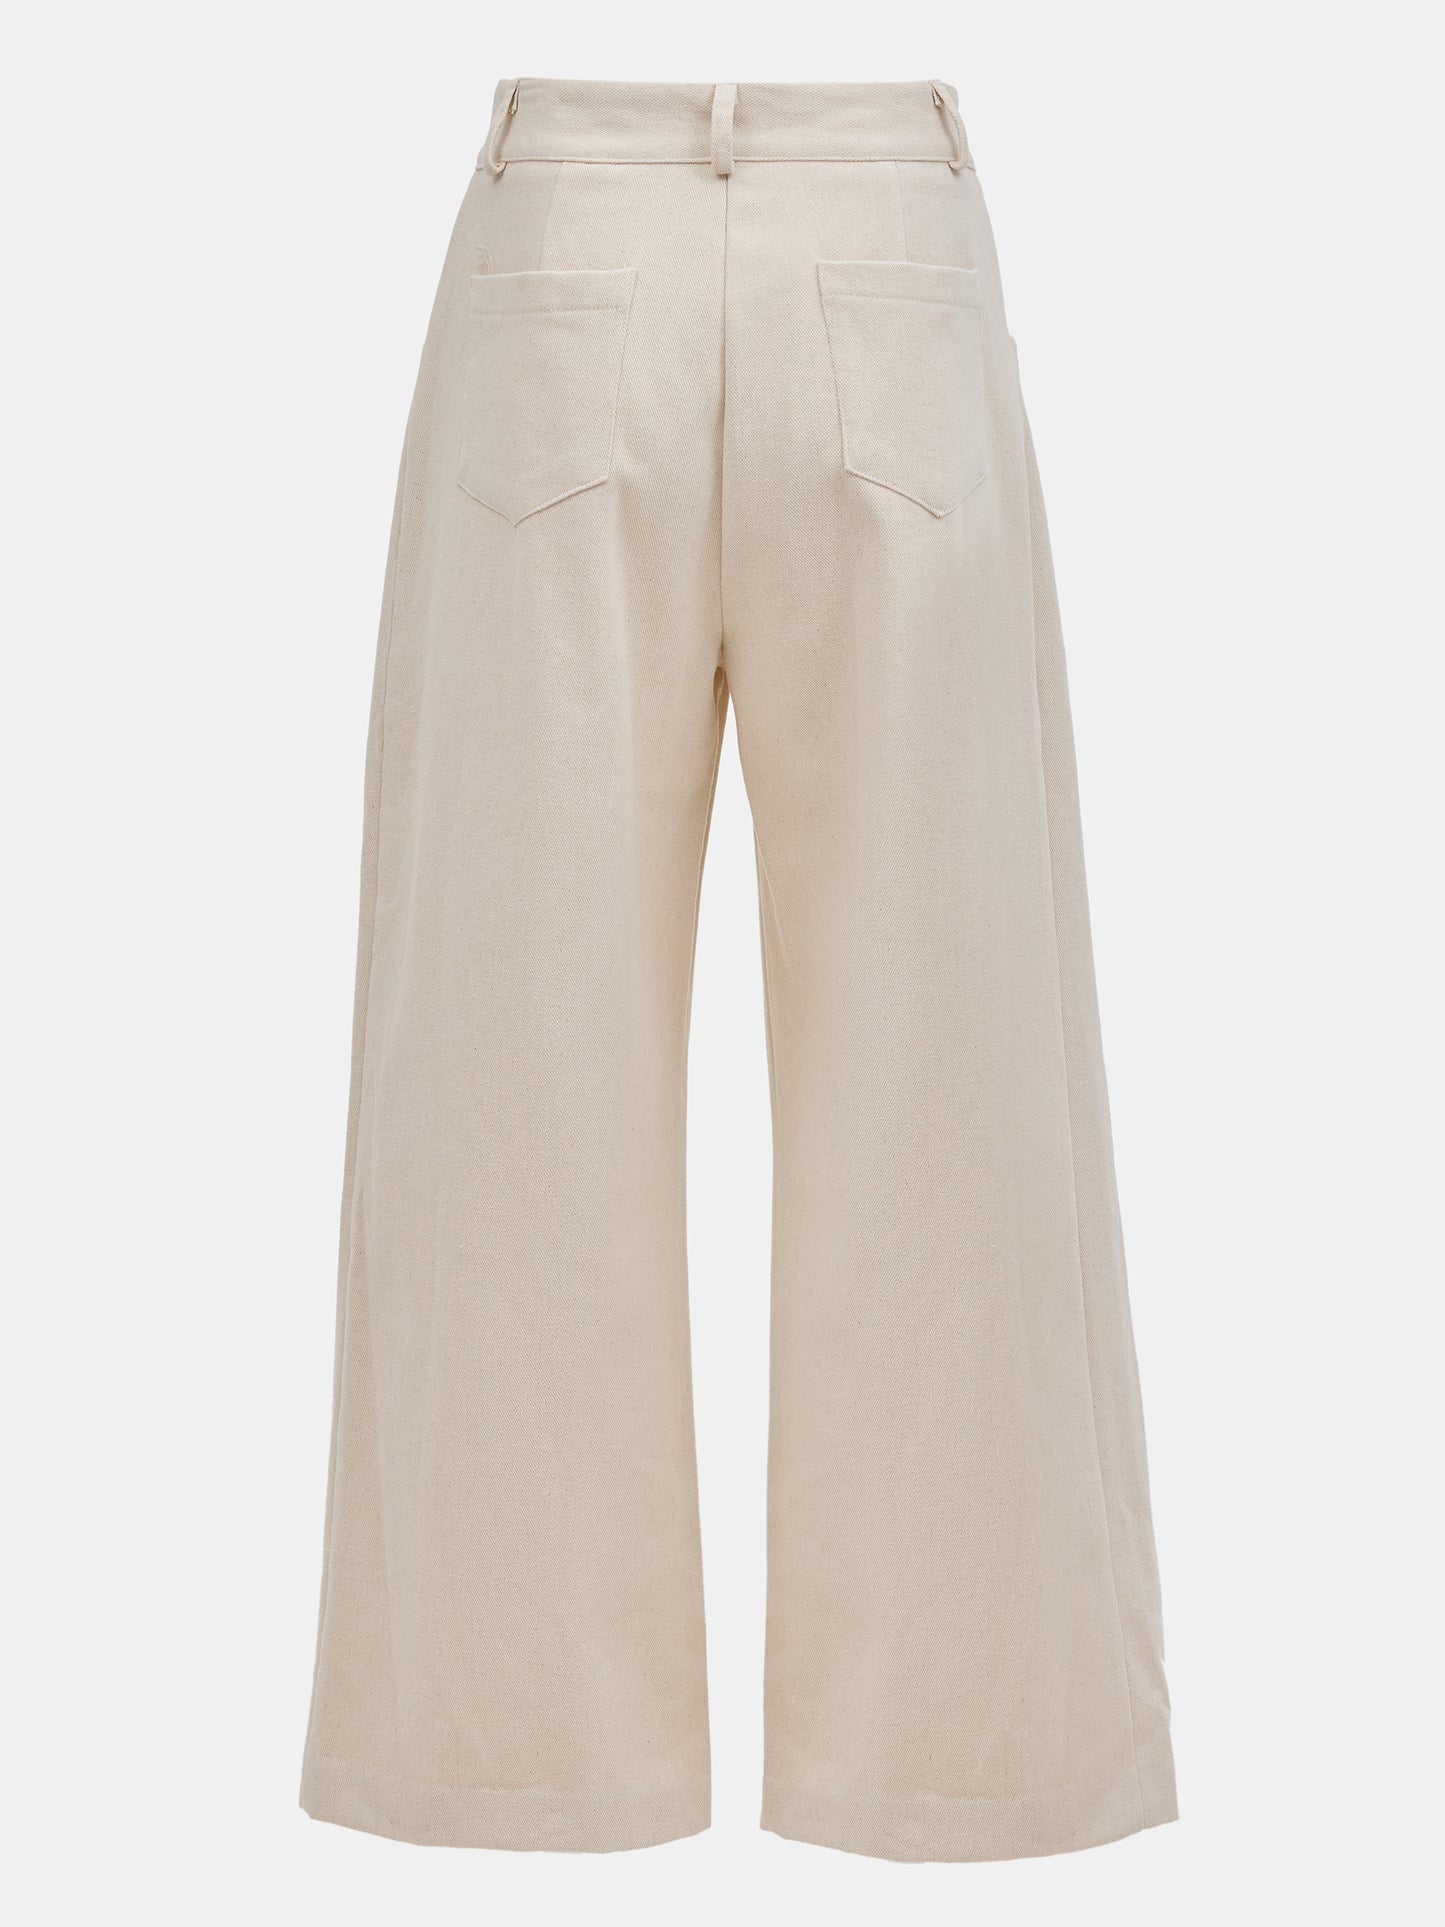 French Terry Pleated Pants, Hanji